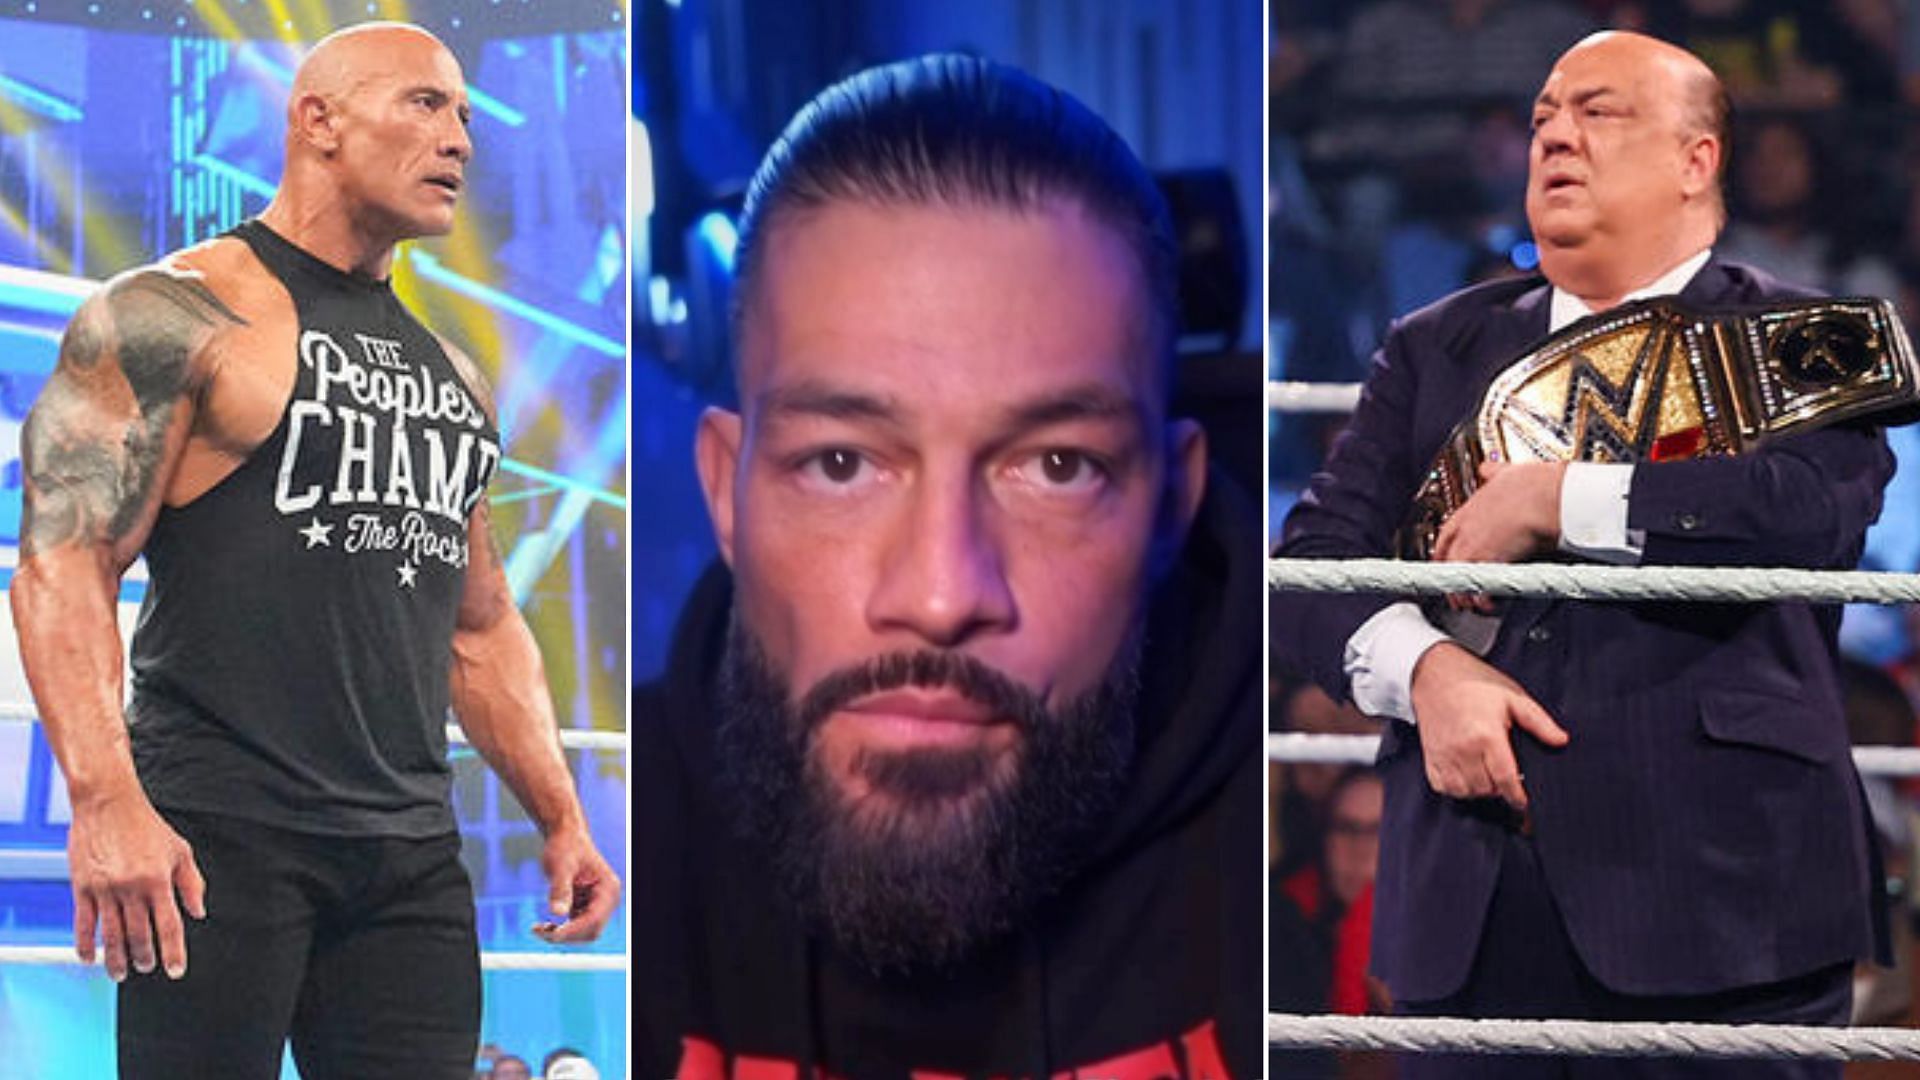 The Rock on the left, Roman Reigns in the middle, Paul Heyman on the right [Image credits: WWE.com and star